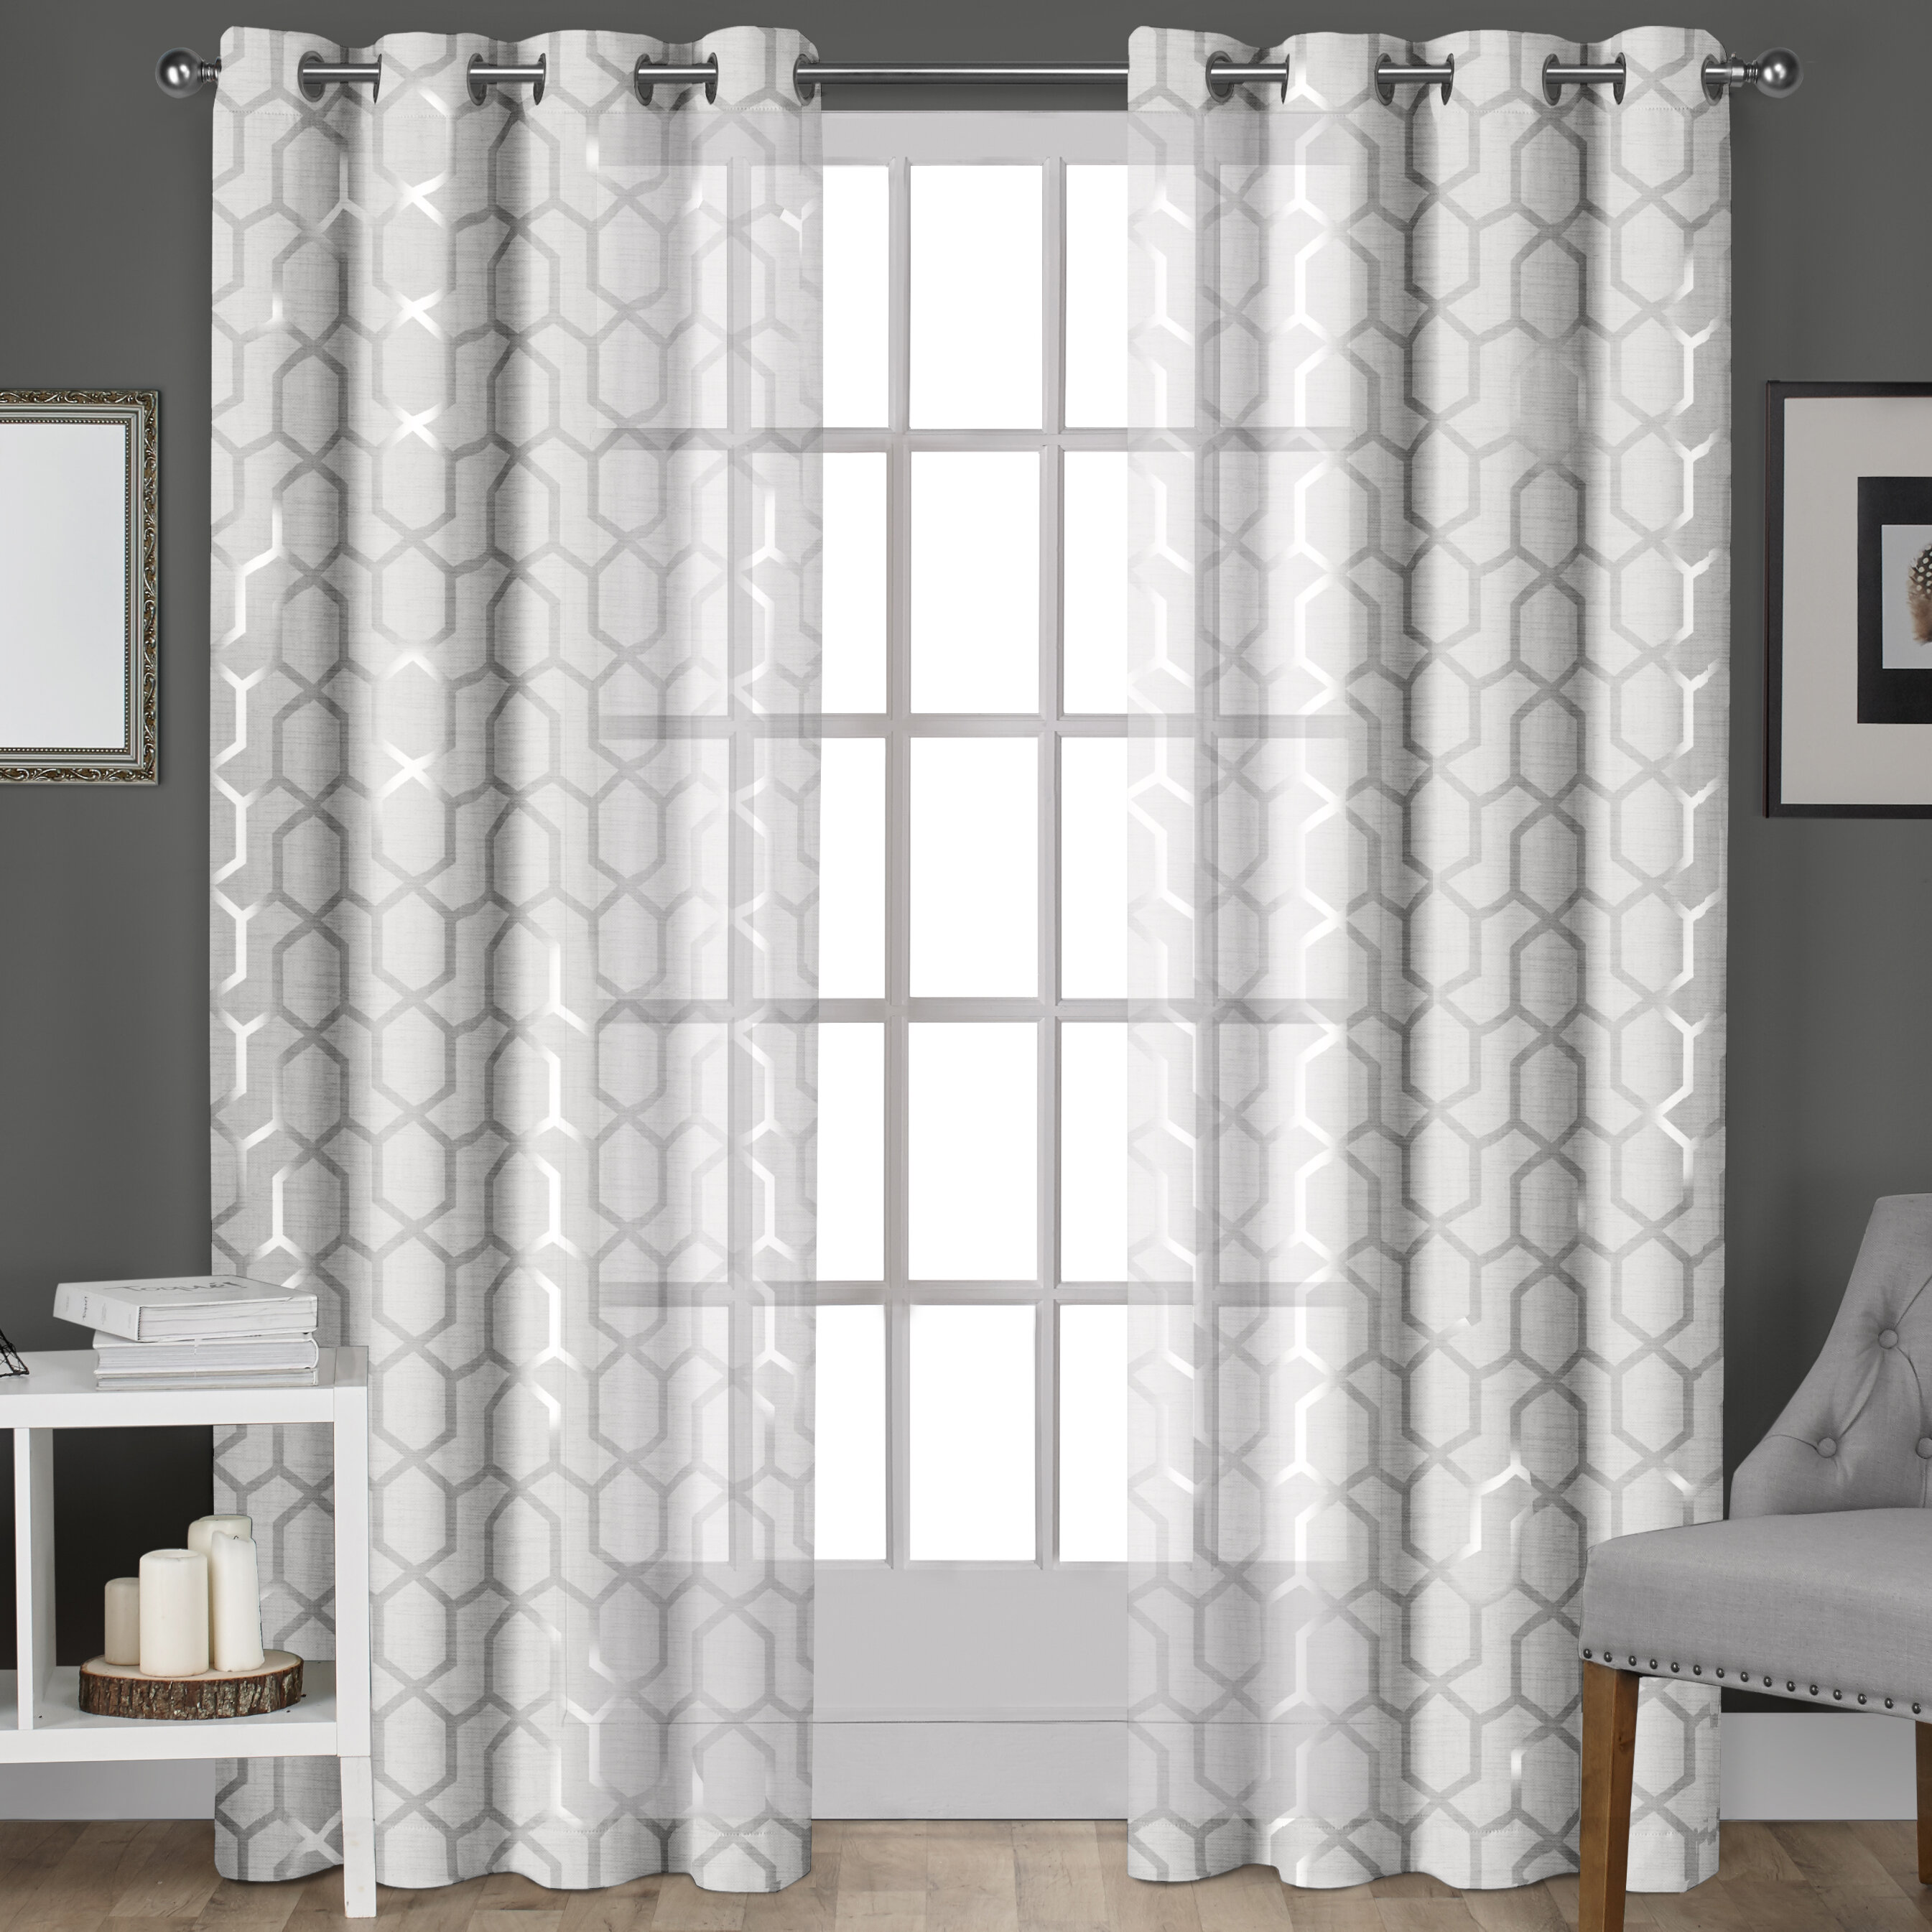 2 Panel Sheer Voile Curtains Grommet Top Window Drapes for Living Dining Room 